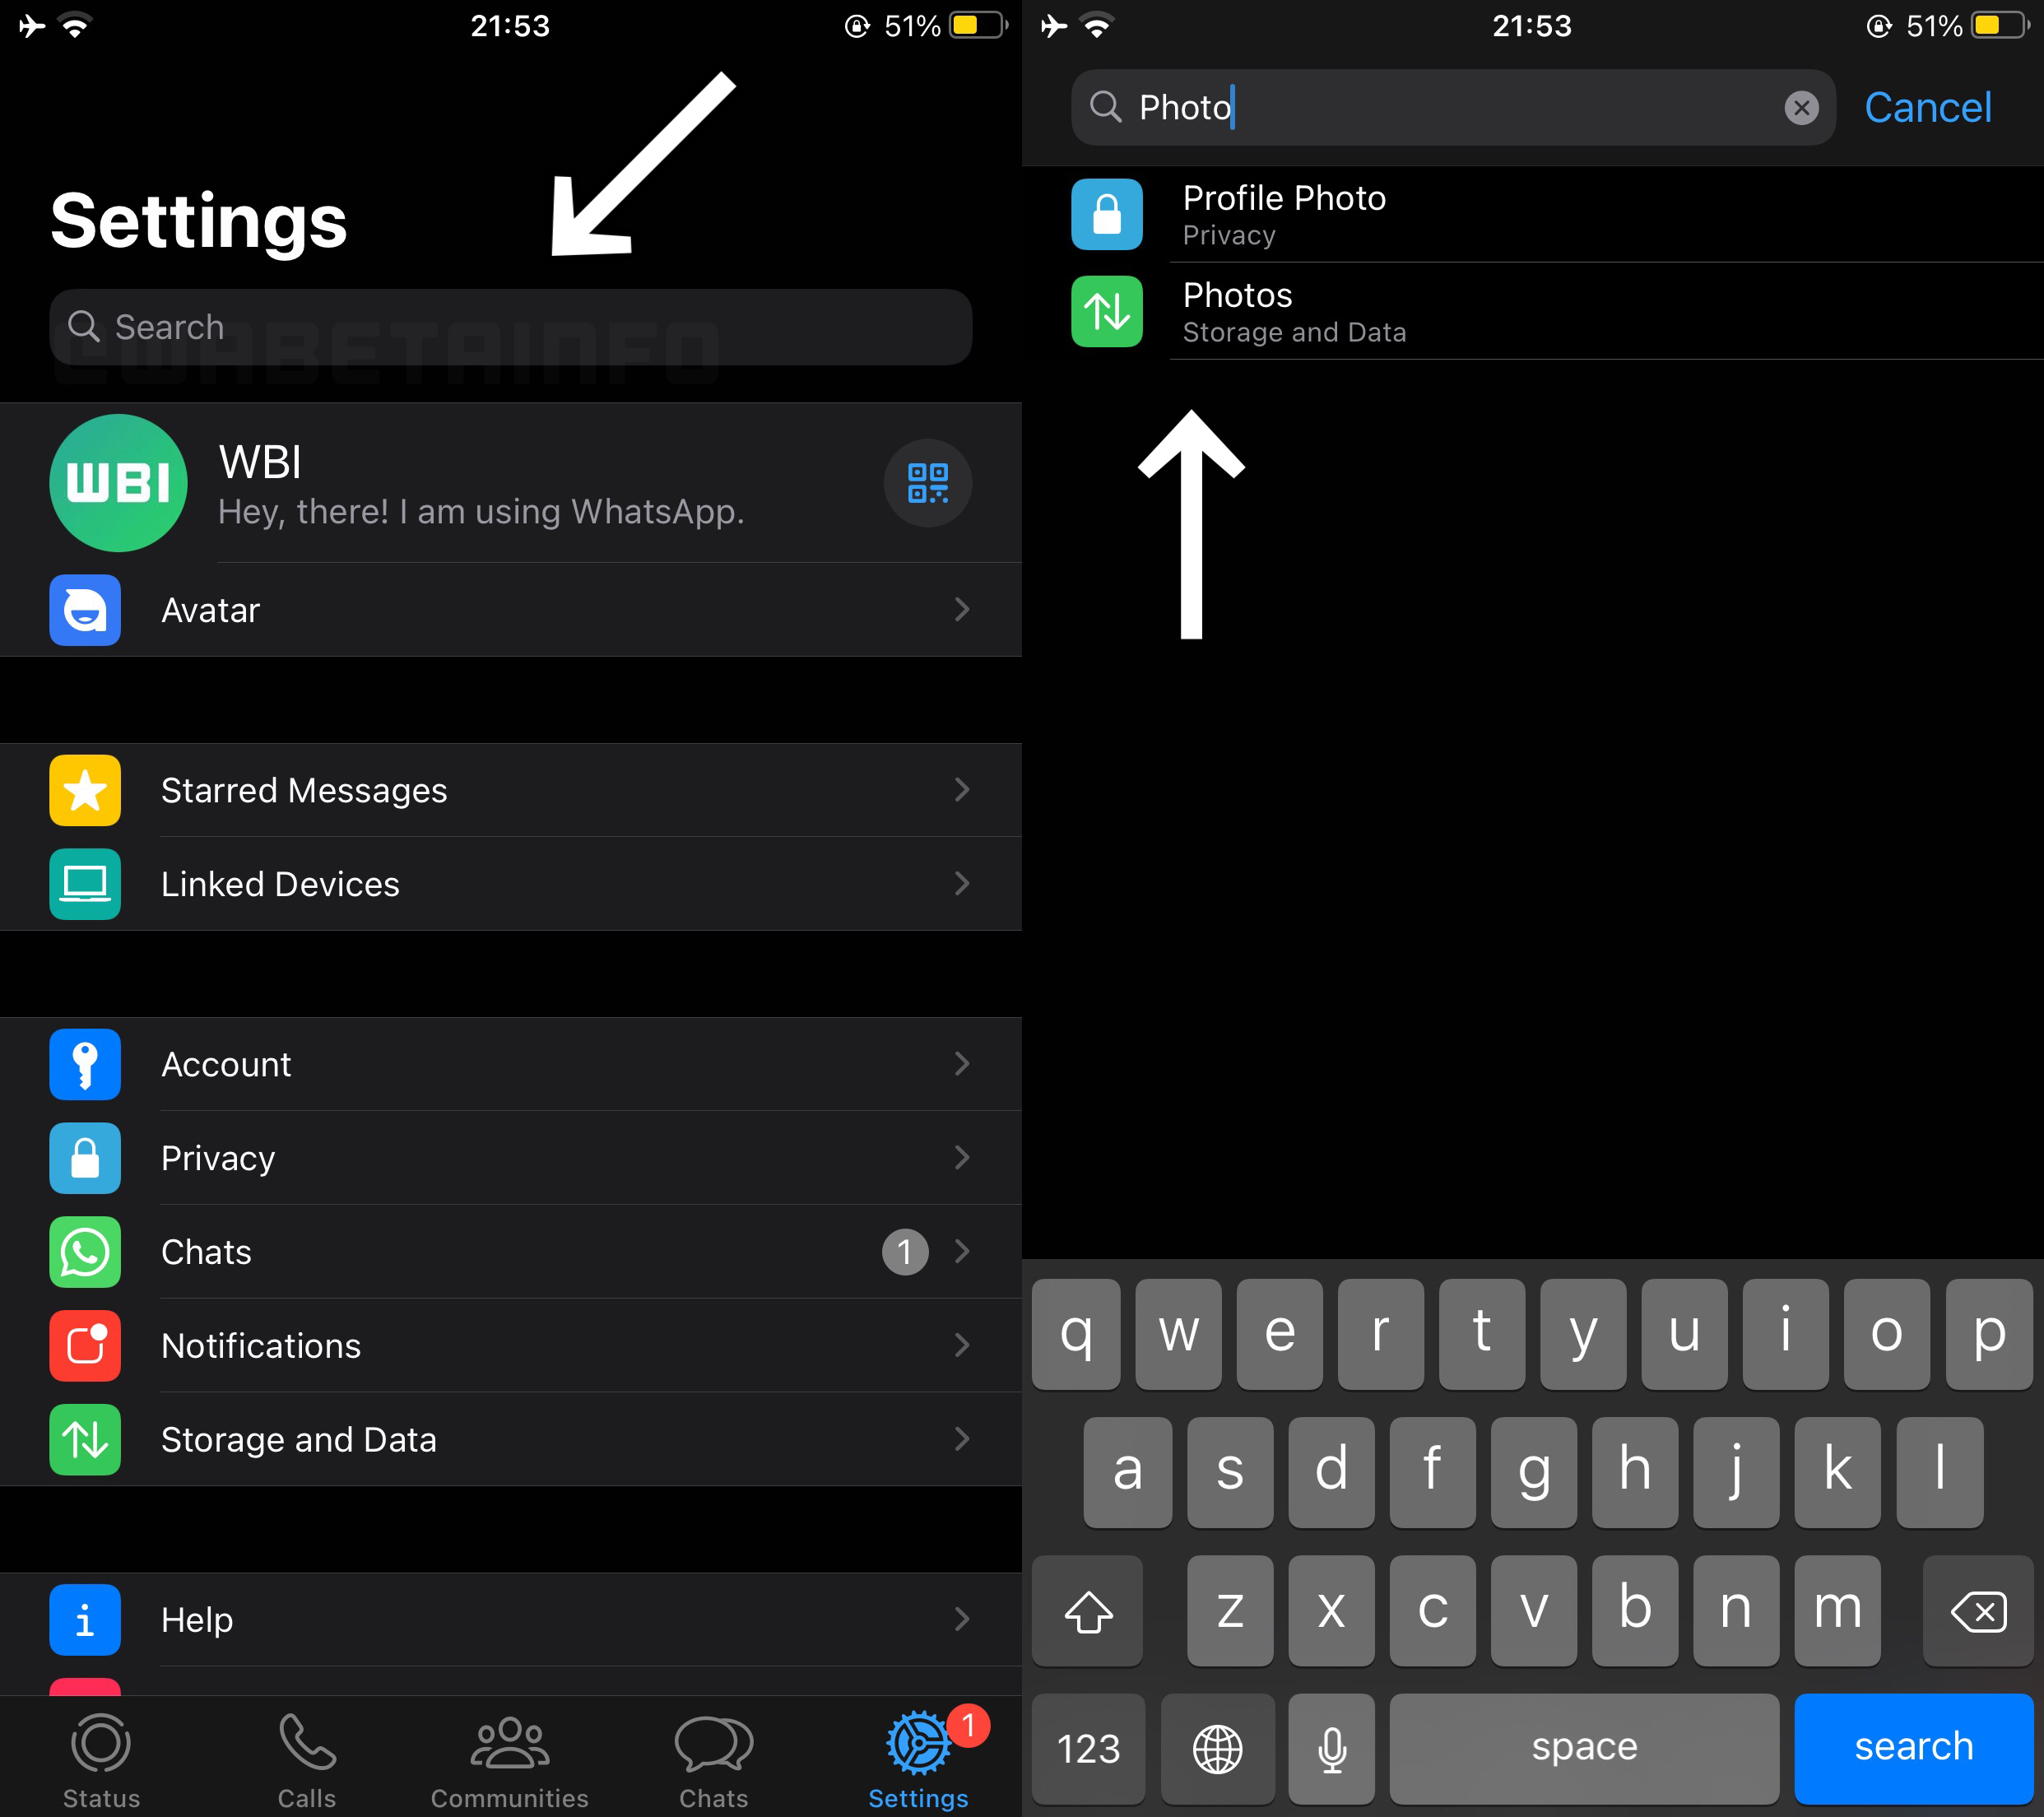 Settings search is coming to WhatsApp